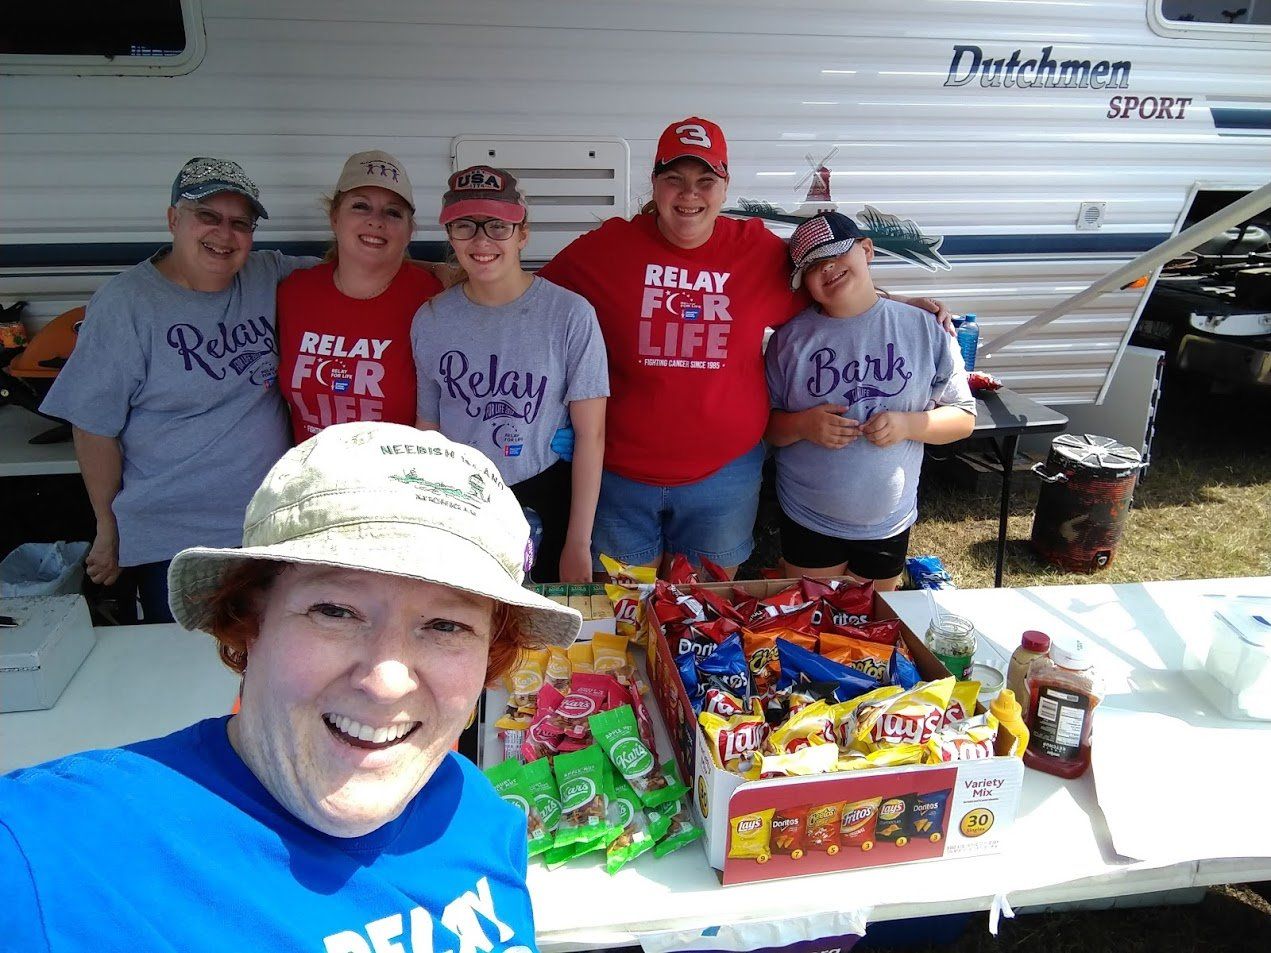 Electrolysis — Volunteer Team Taking A Picture With Snacks in Marie, MI